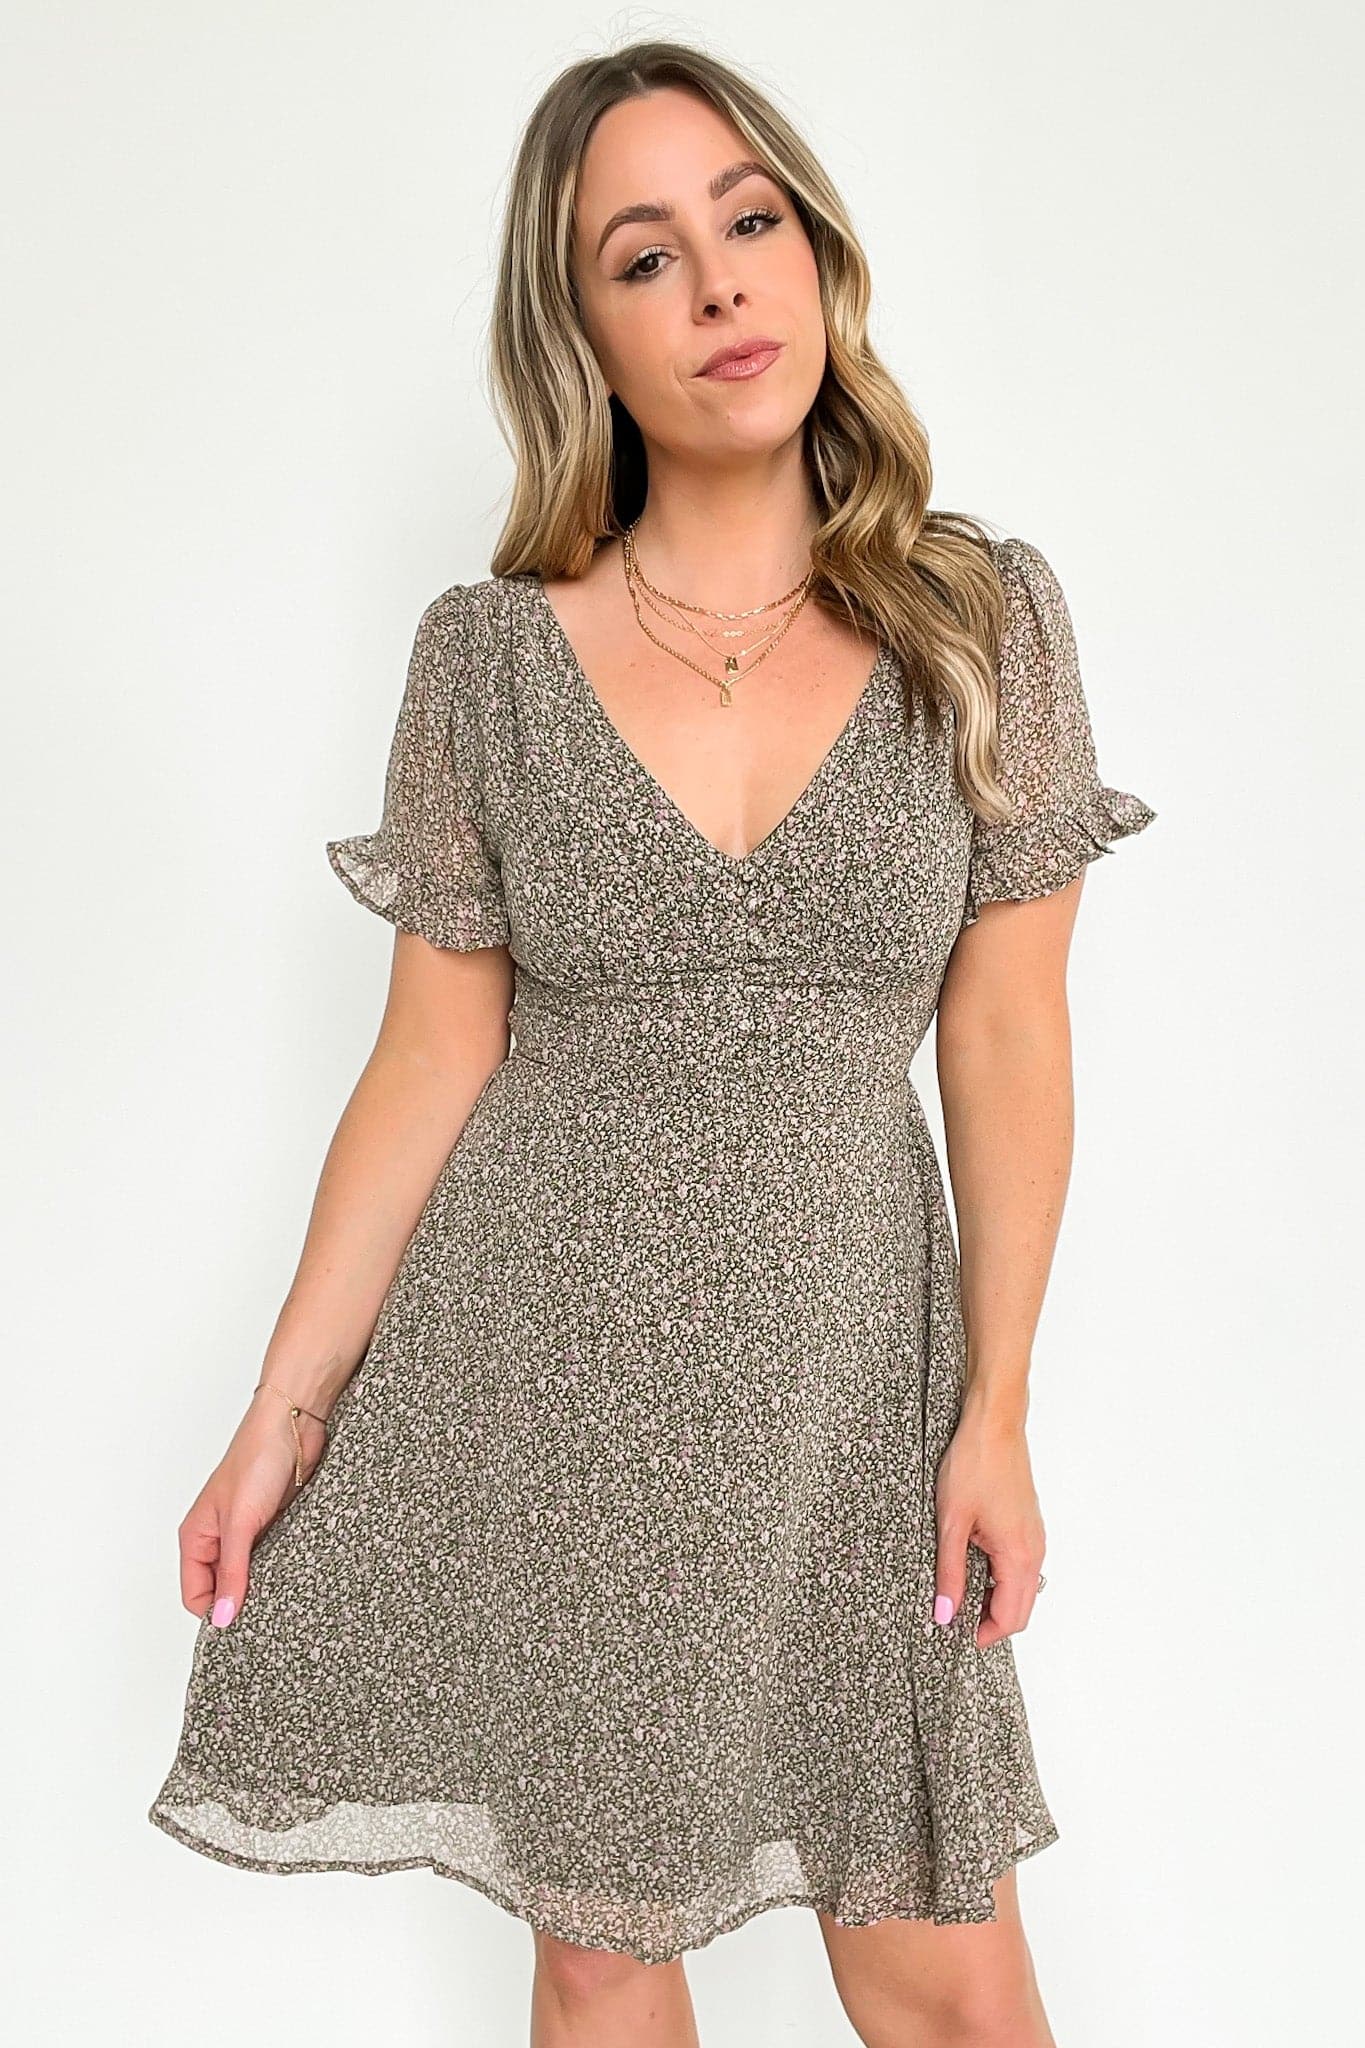  Roxanah Floral Ruffle Button Dress - FINAL SALE - Madison and Mallory